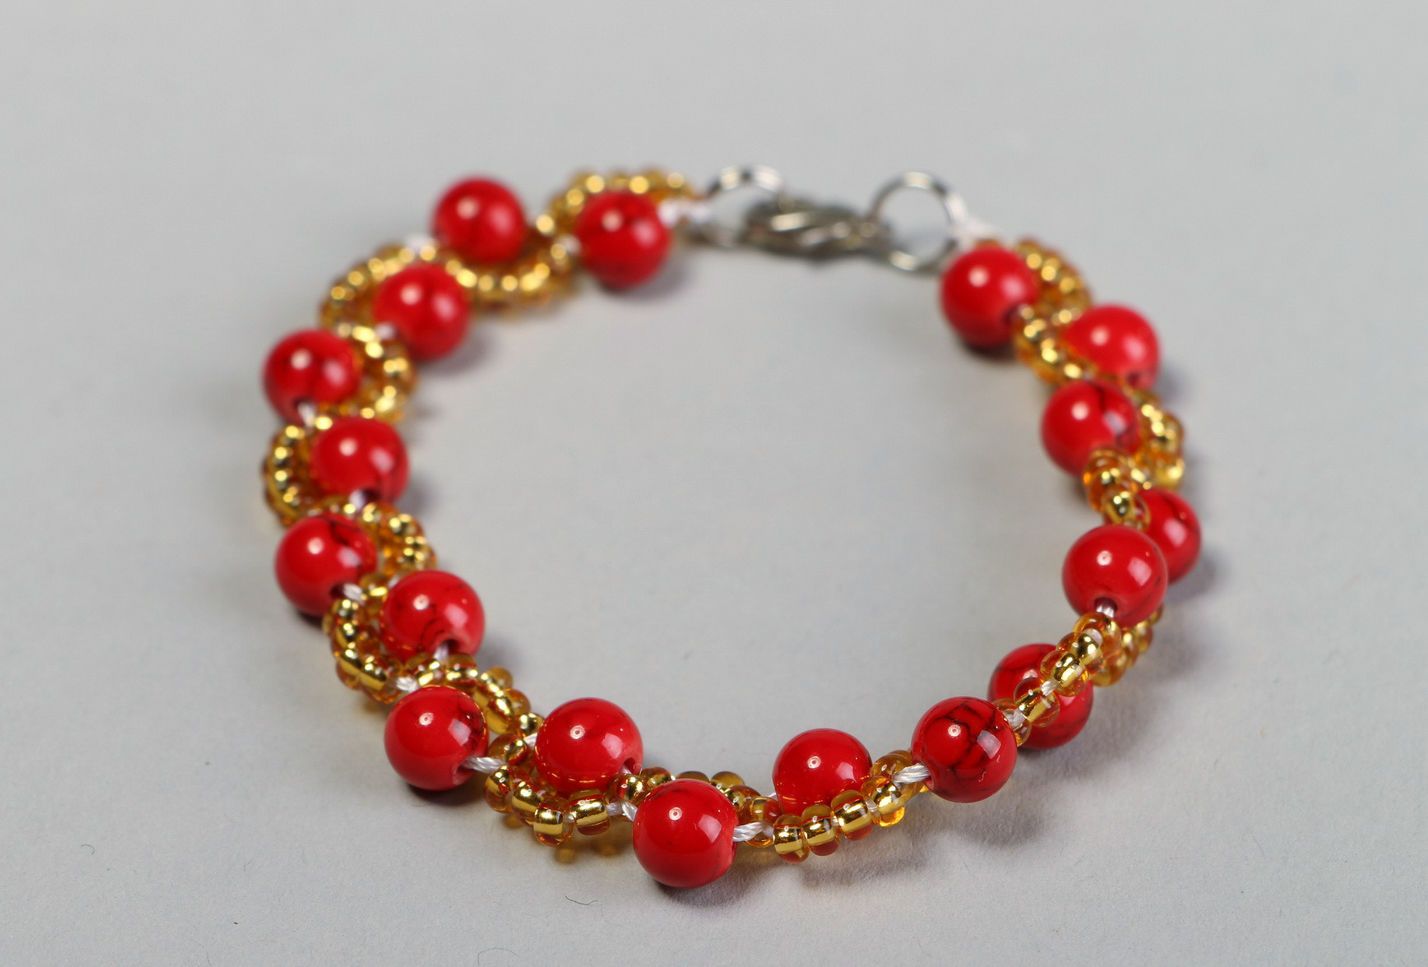 Bracelet made of coral and beads photo 3